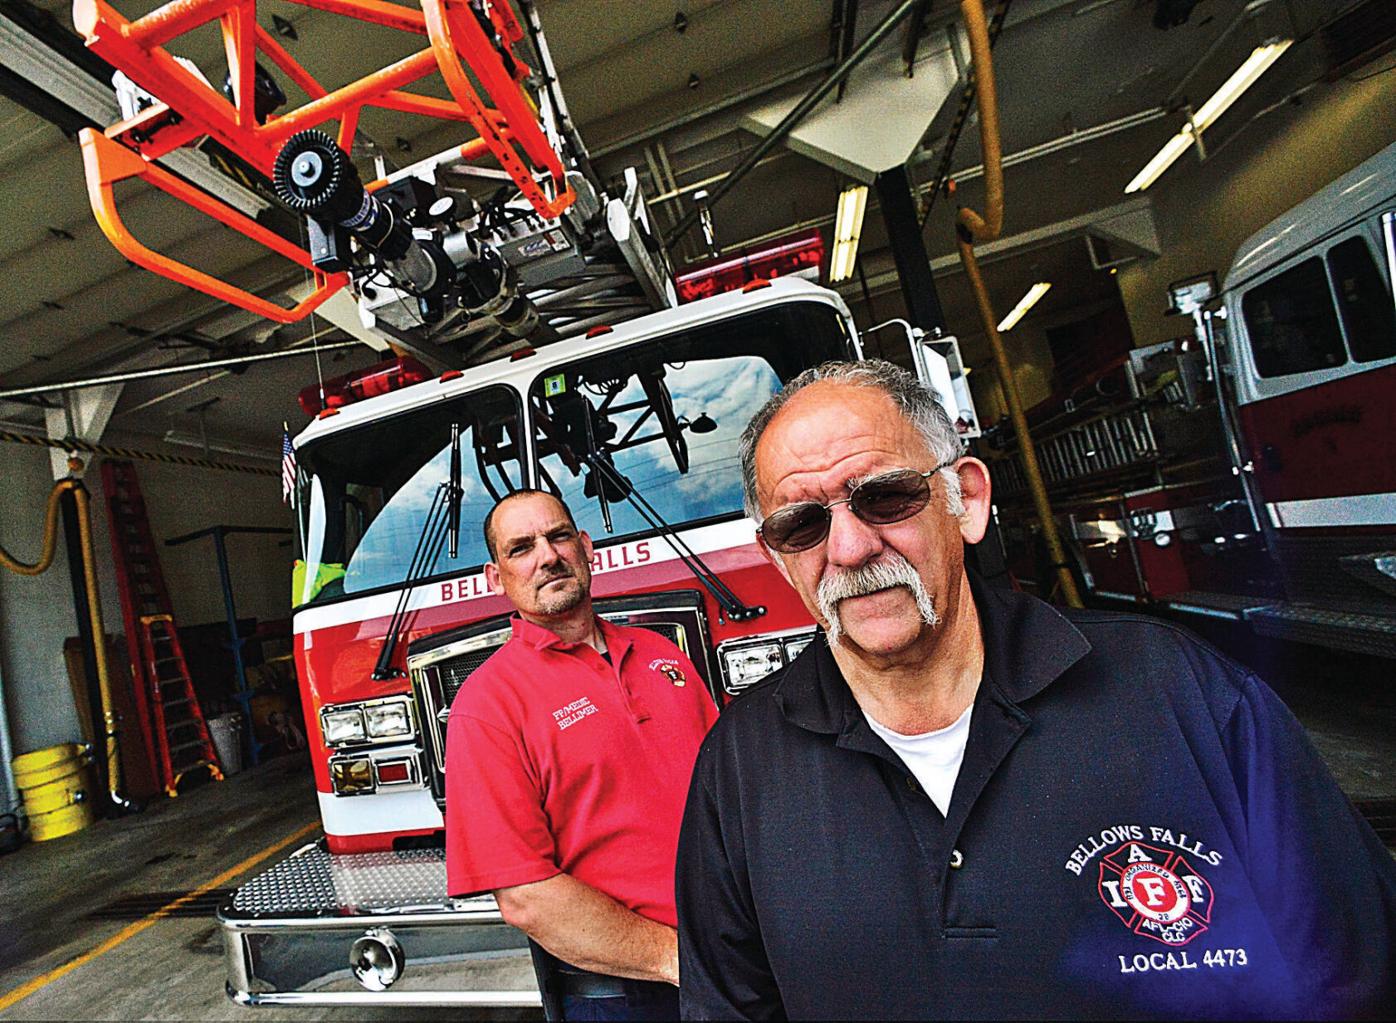 Trustees eliminate all full-time Bellows Falls firefighters